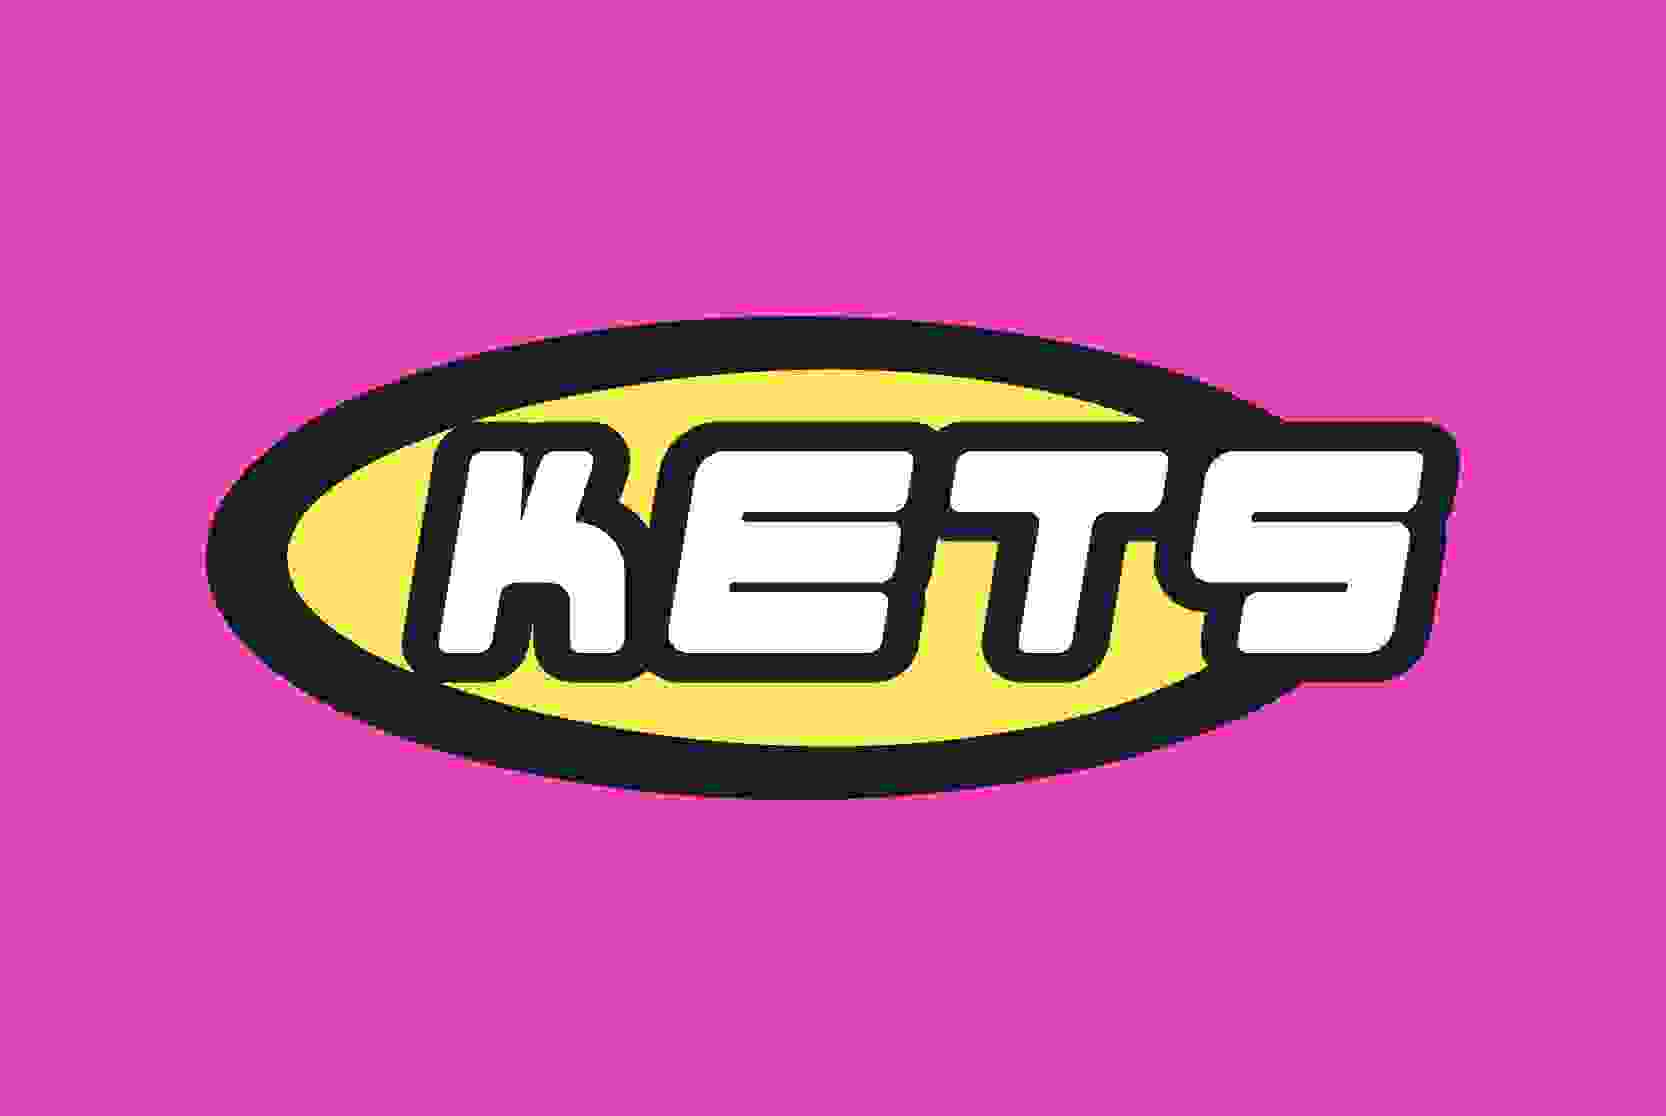 Typography logo 'KETS' in black and yellow on a fuchsia hot pink background